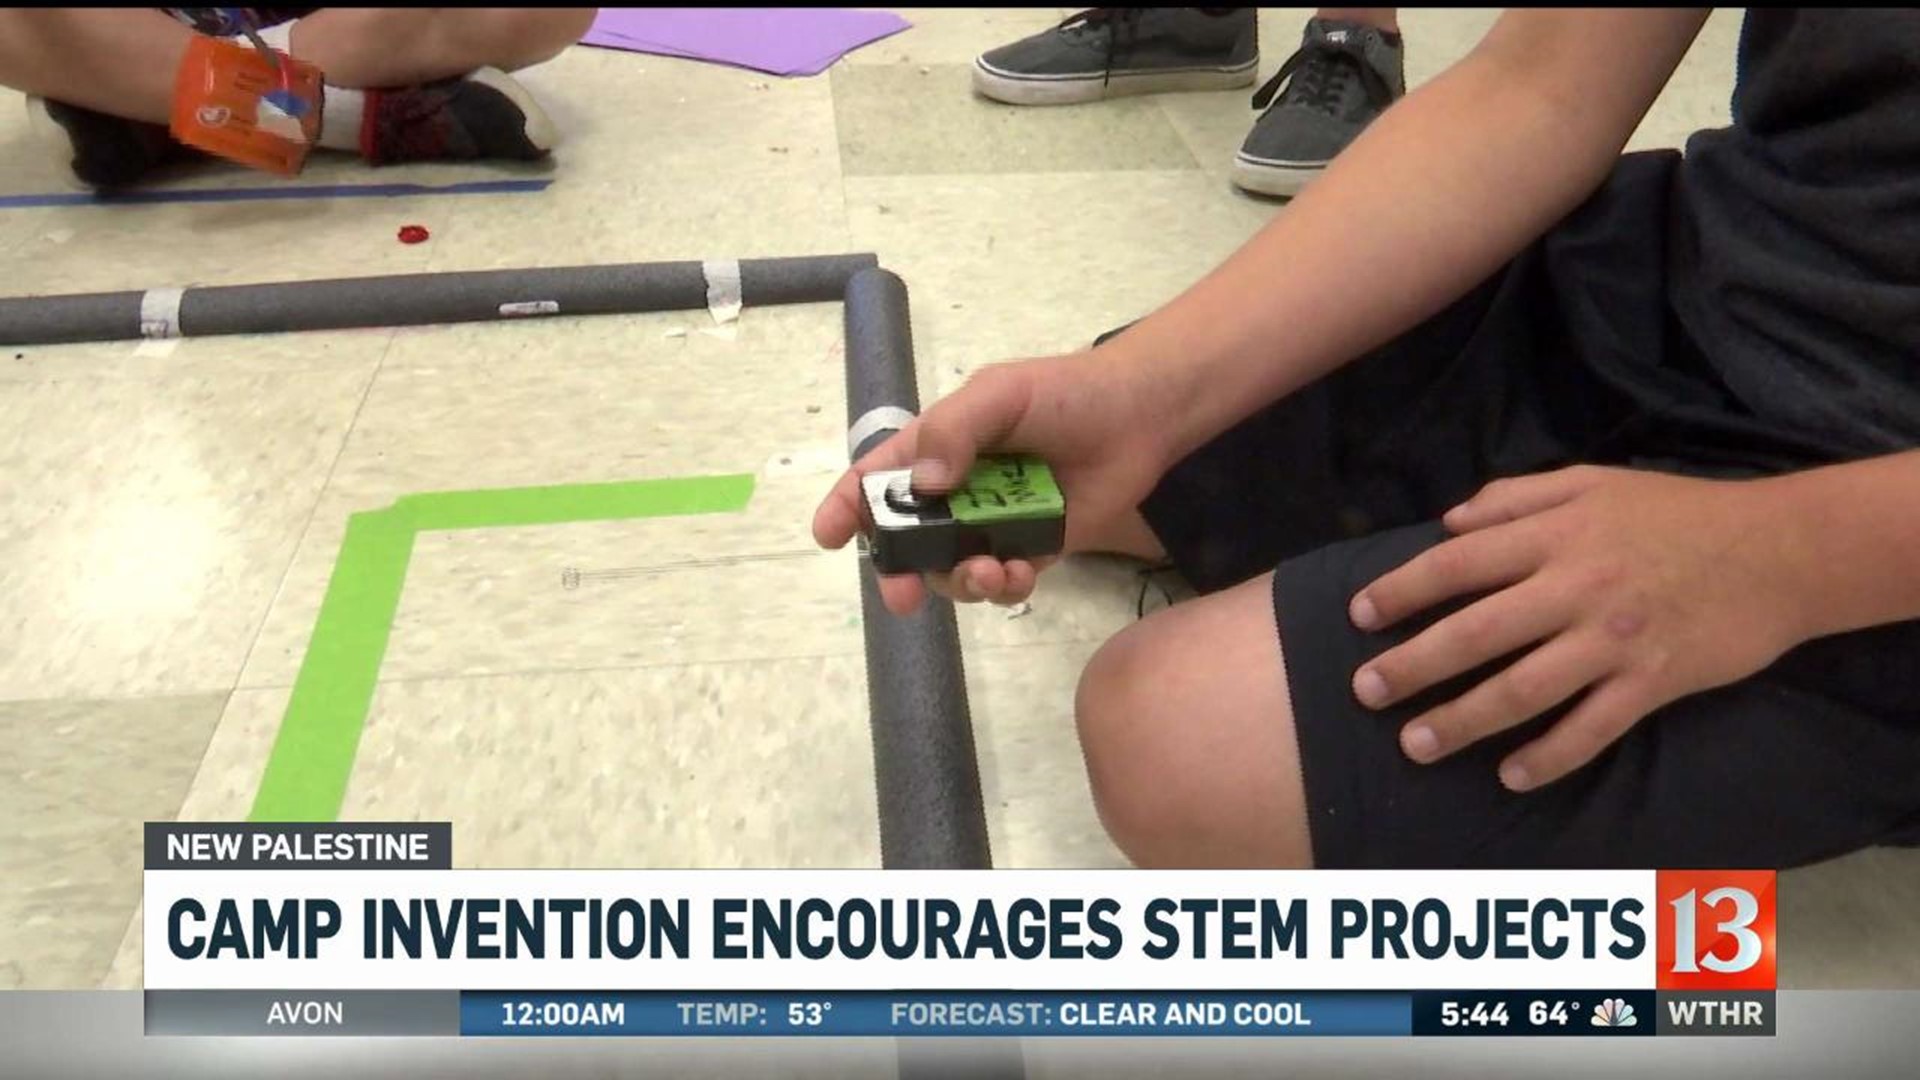 Camp invention encourages stem projects